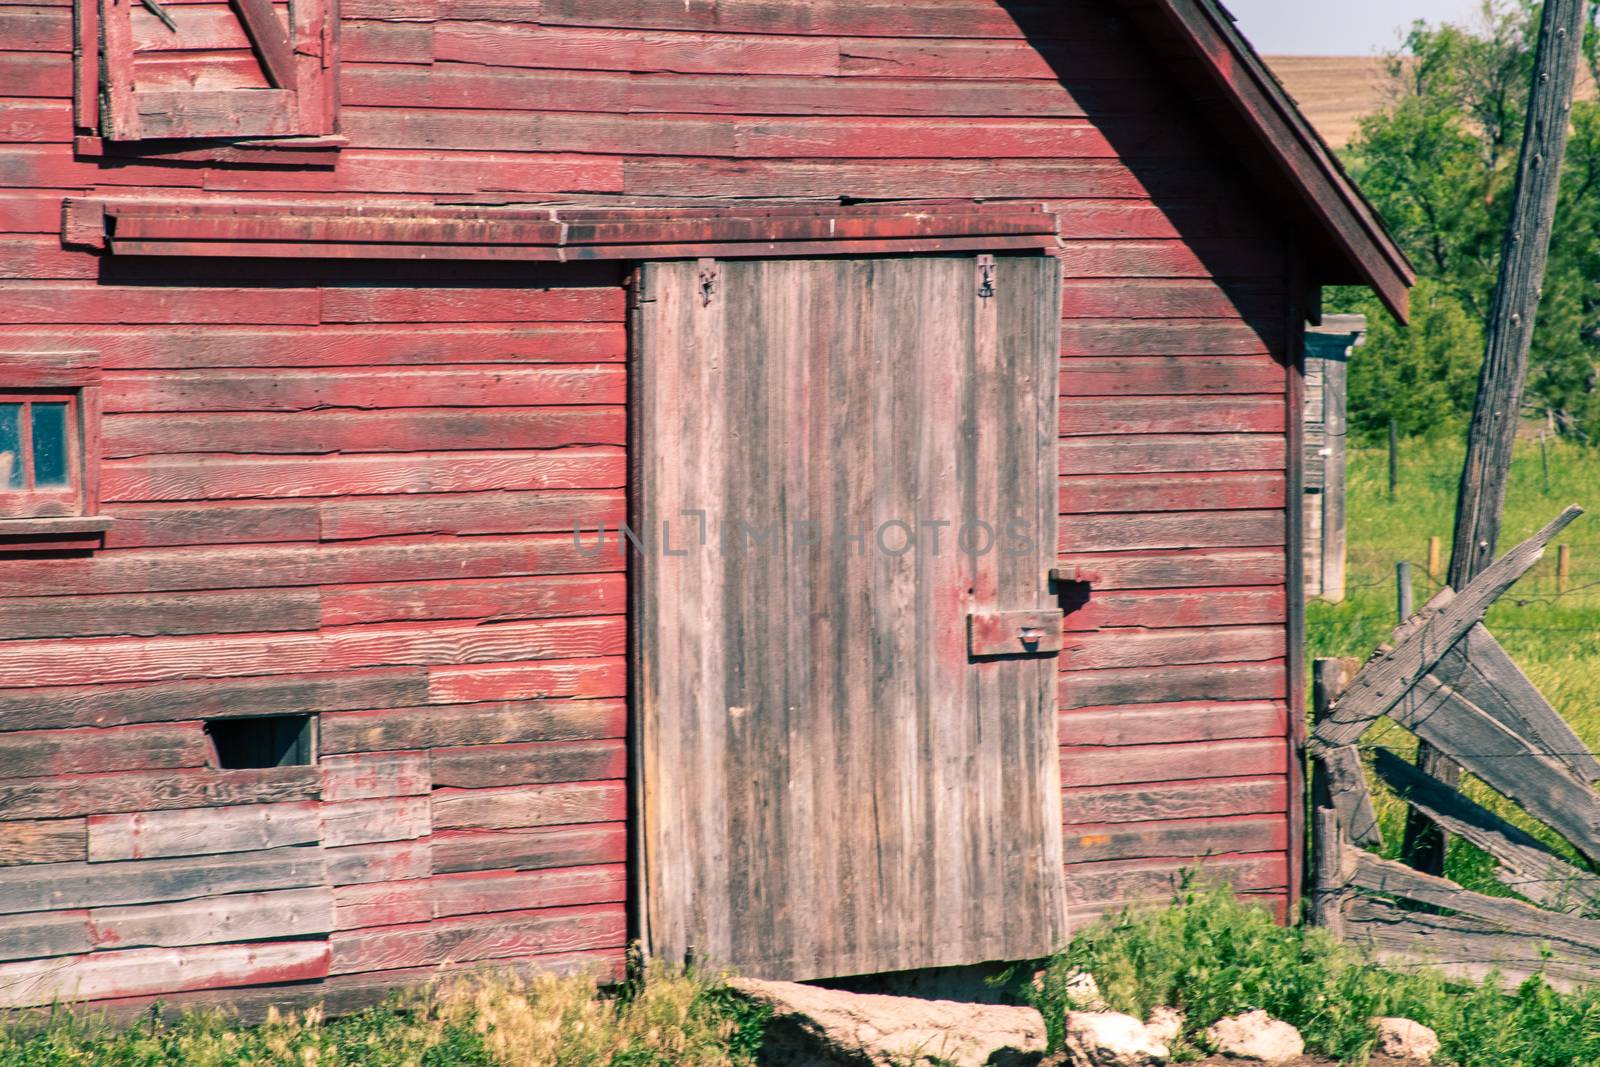  Front of an old abandoned red barn with door and sliding door  by gena_wells